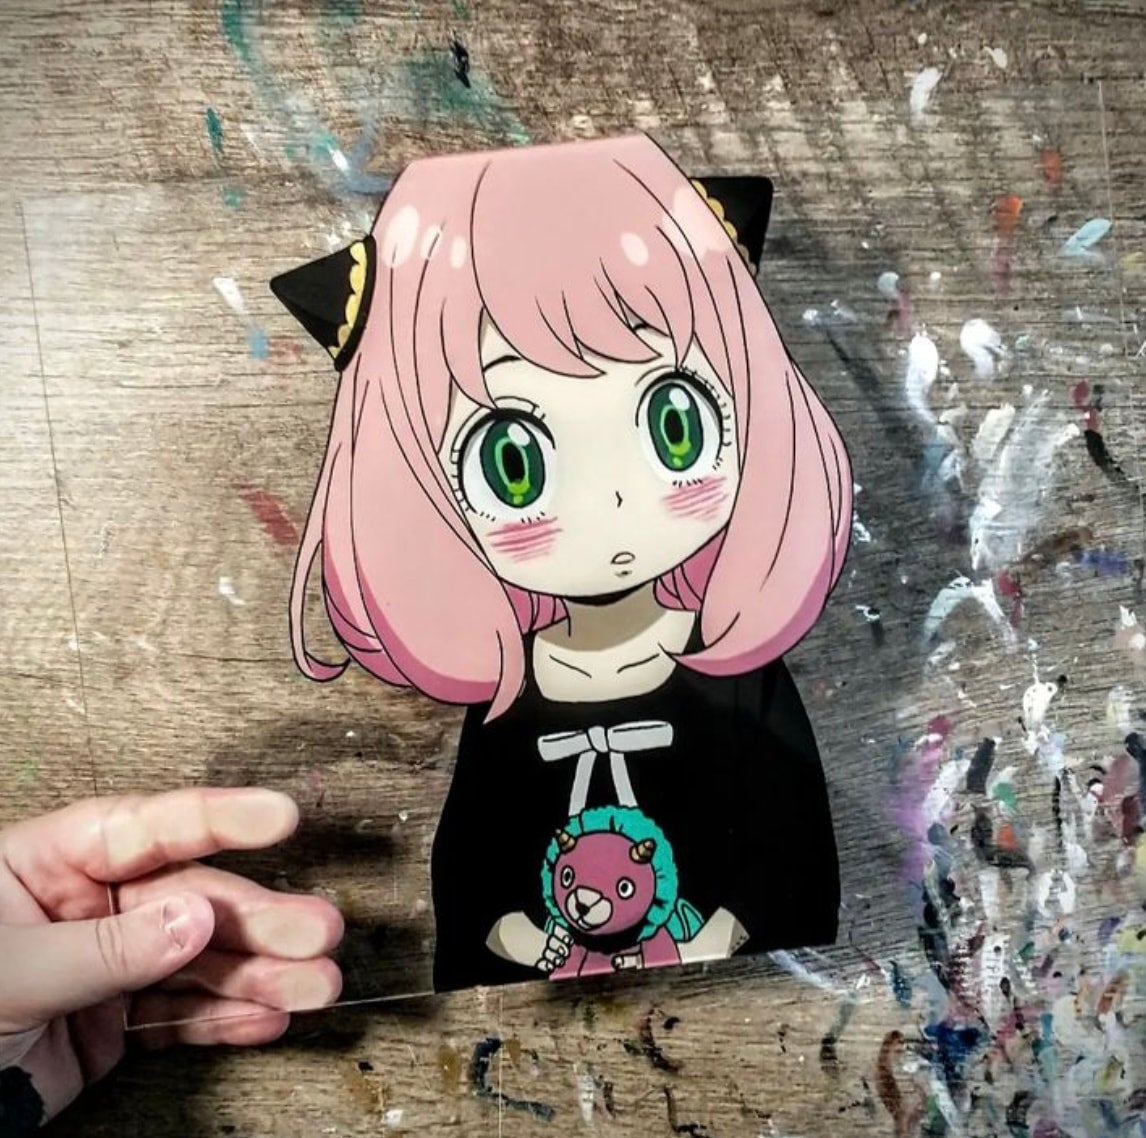 The Experience of Making Tik Tok Anime Glass Art – In Third Person